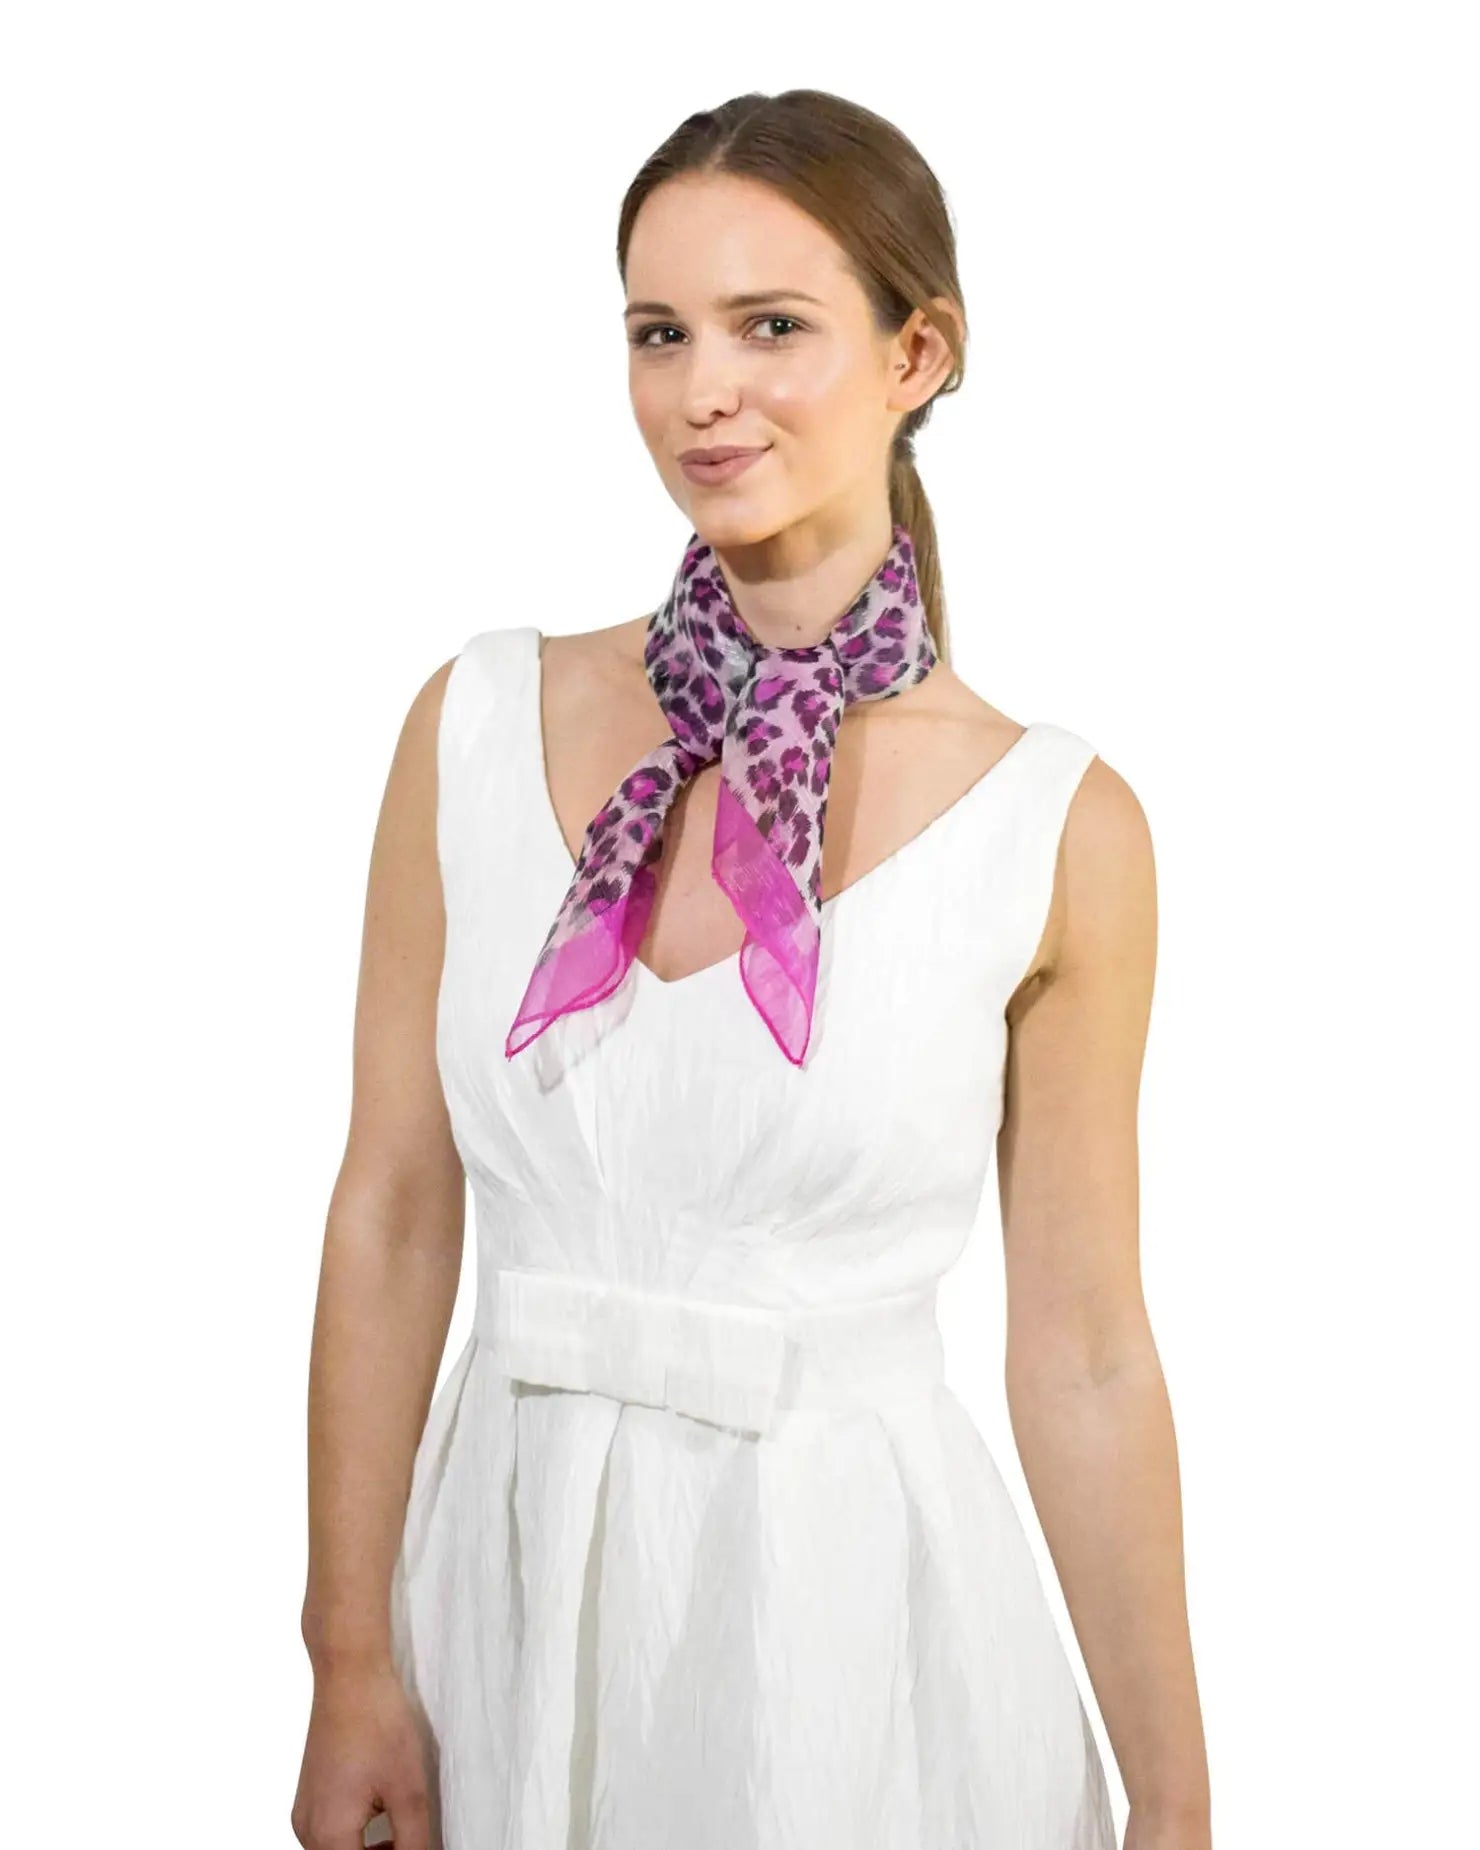 Woman in white dress and pink scarf wearing Leopard Print Chiffon Square Neck Scarf